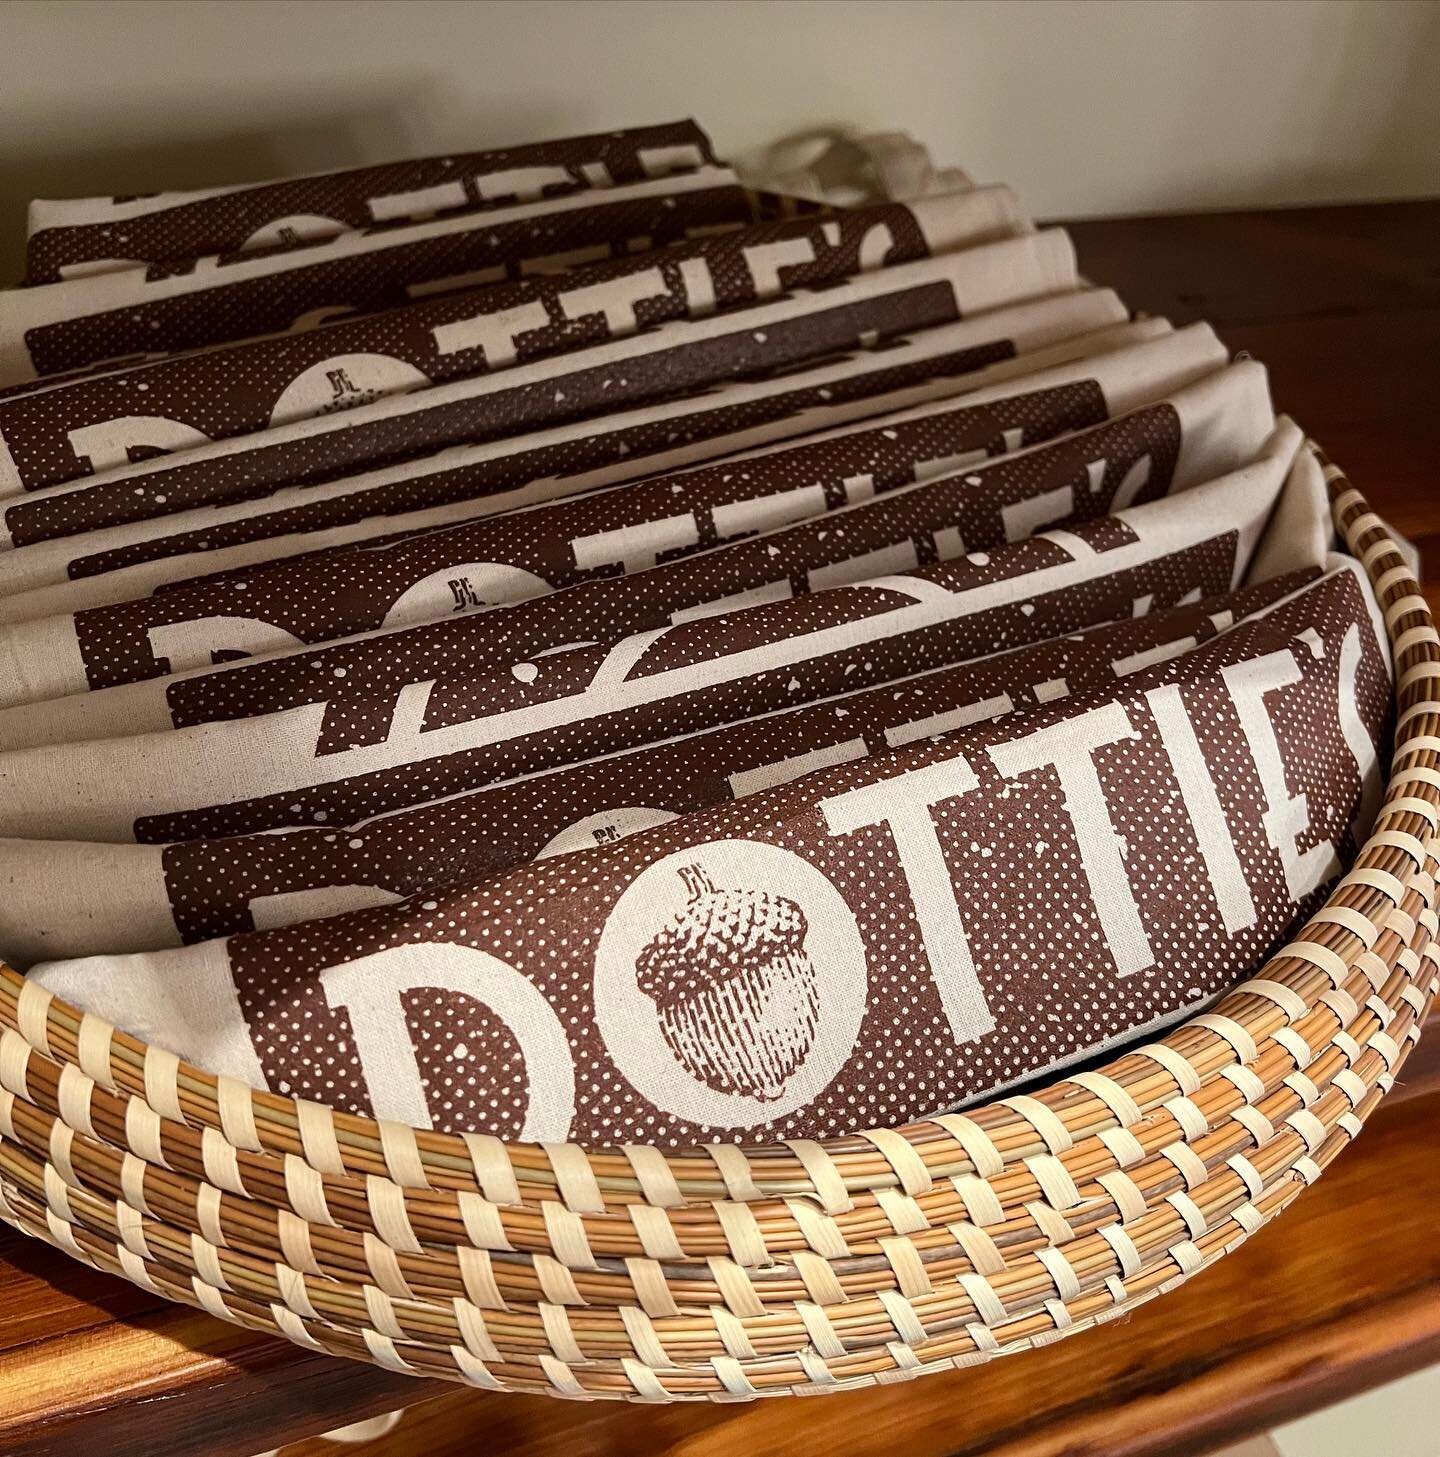 We&rsquo;ve got swag even grandma would approve of! ✨ Check out our Market for Dottie&rsquo;s merch and provisions made by #lowcountry locals and artisans.